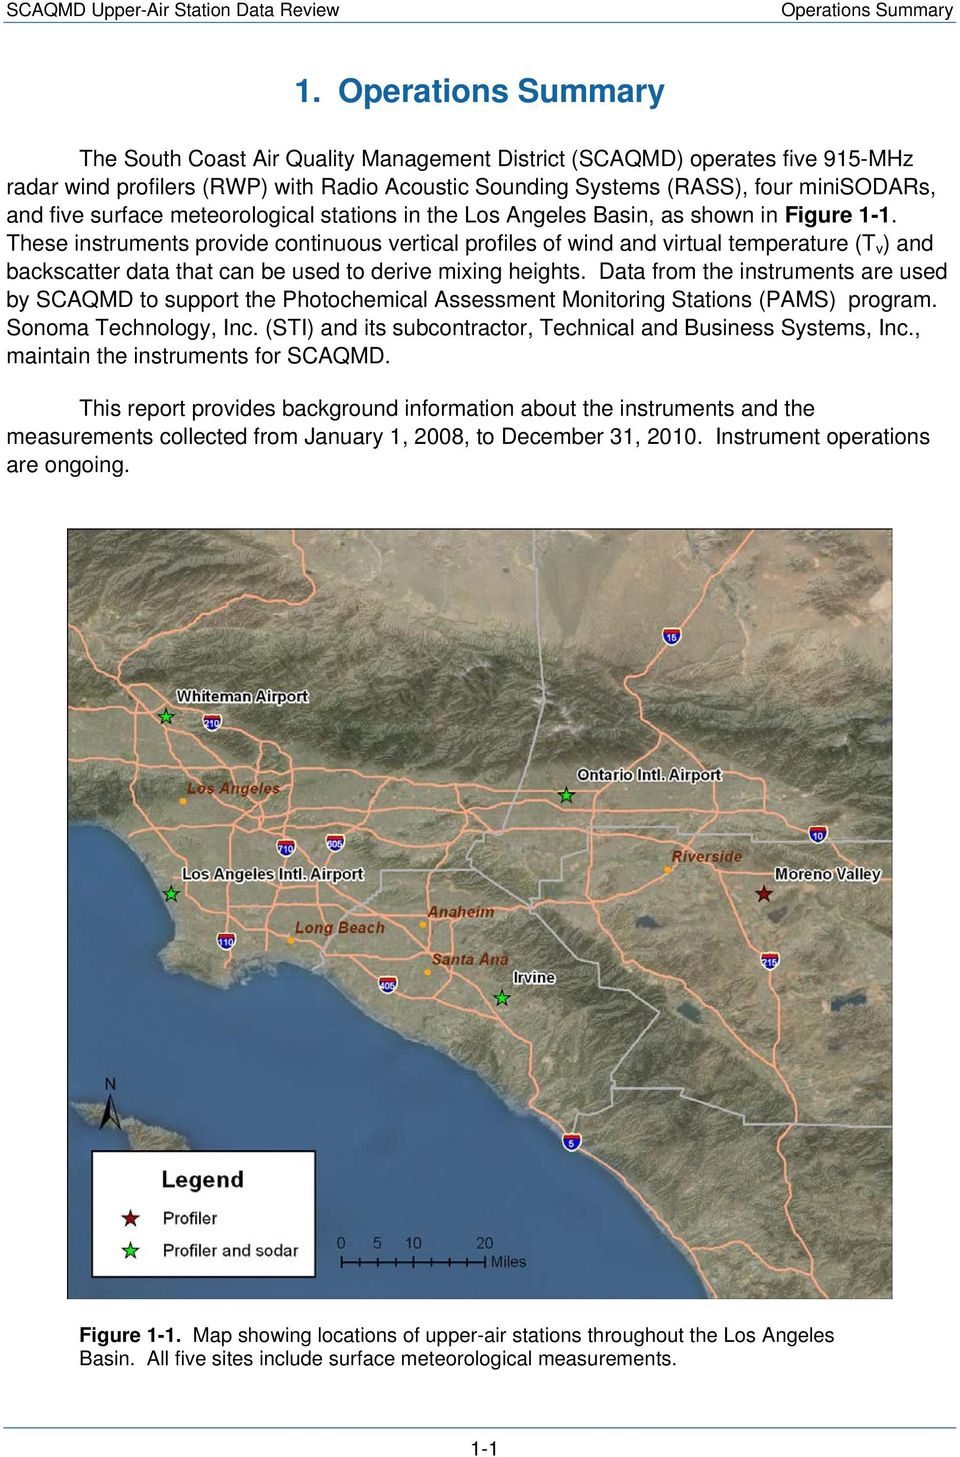 surface meteorological stations in the Los Angeles Basin, as shown in Figure 1-1.